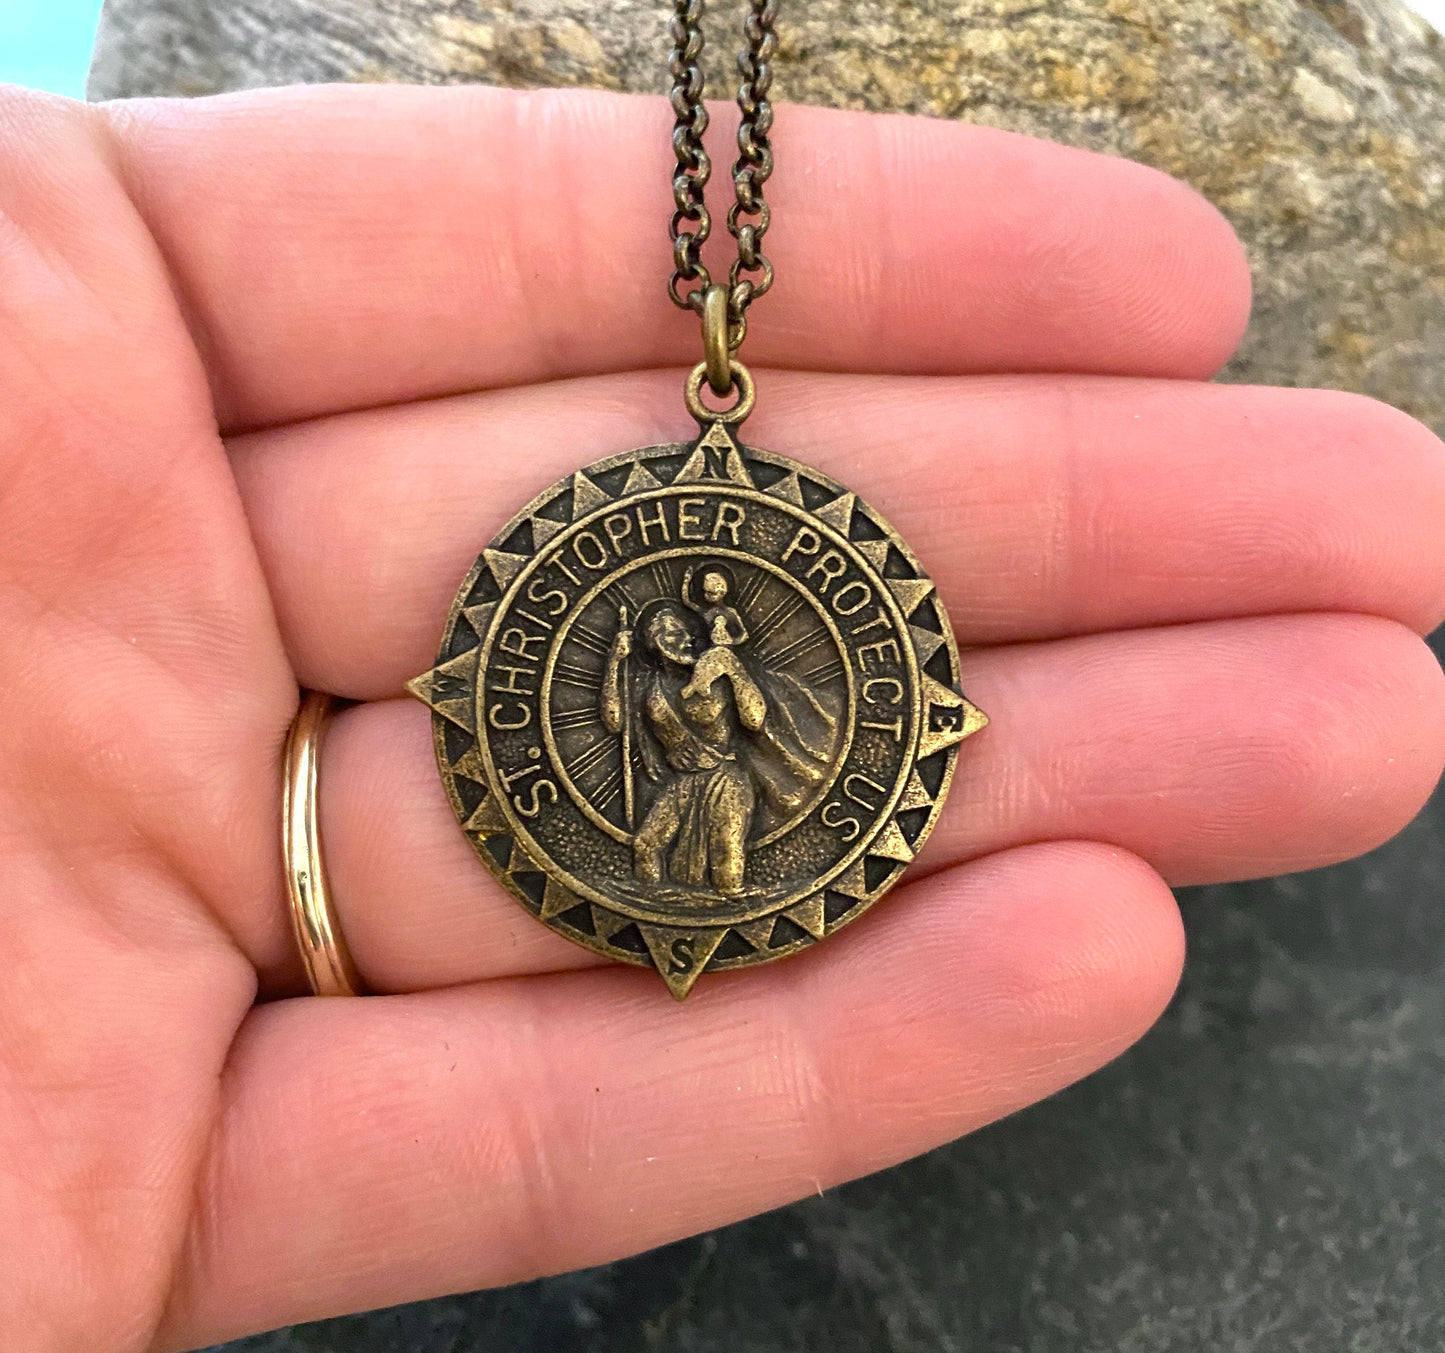 Men's Antiqued Brass Necklace with Large St. Christopher Medal, Unisex Jewelry, Chain length 20 or 24 inches BR-047